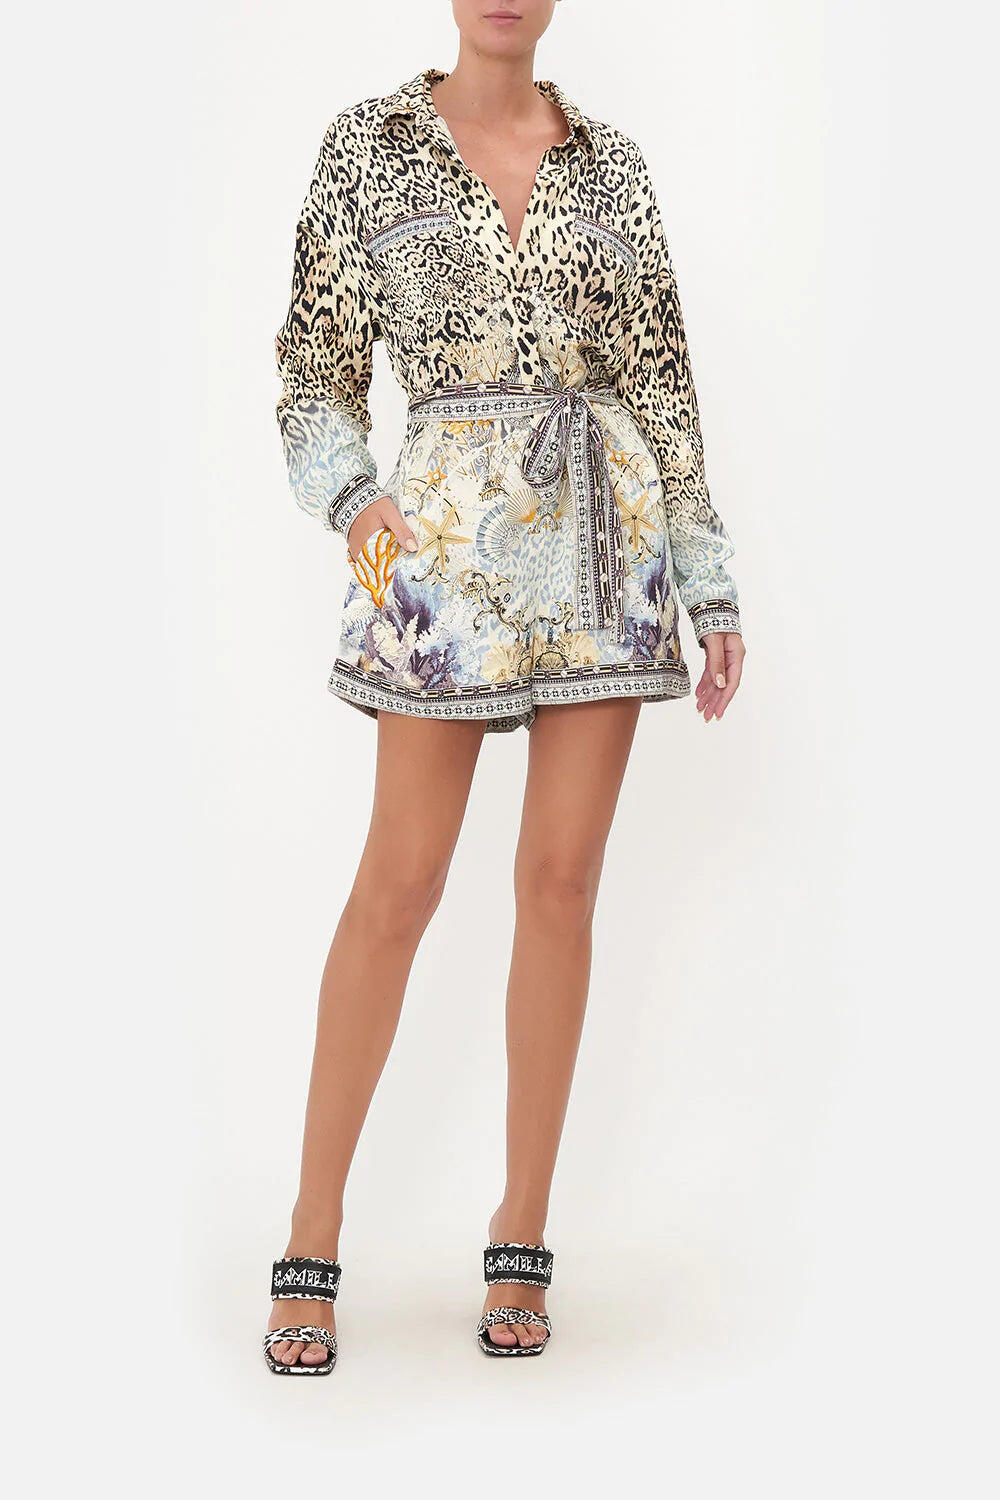 Load image into Gallery viewer, Leopard Print Playsuit in Icy Blue
